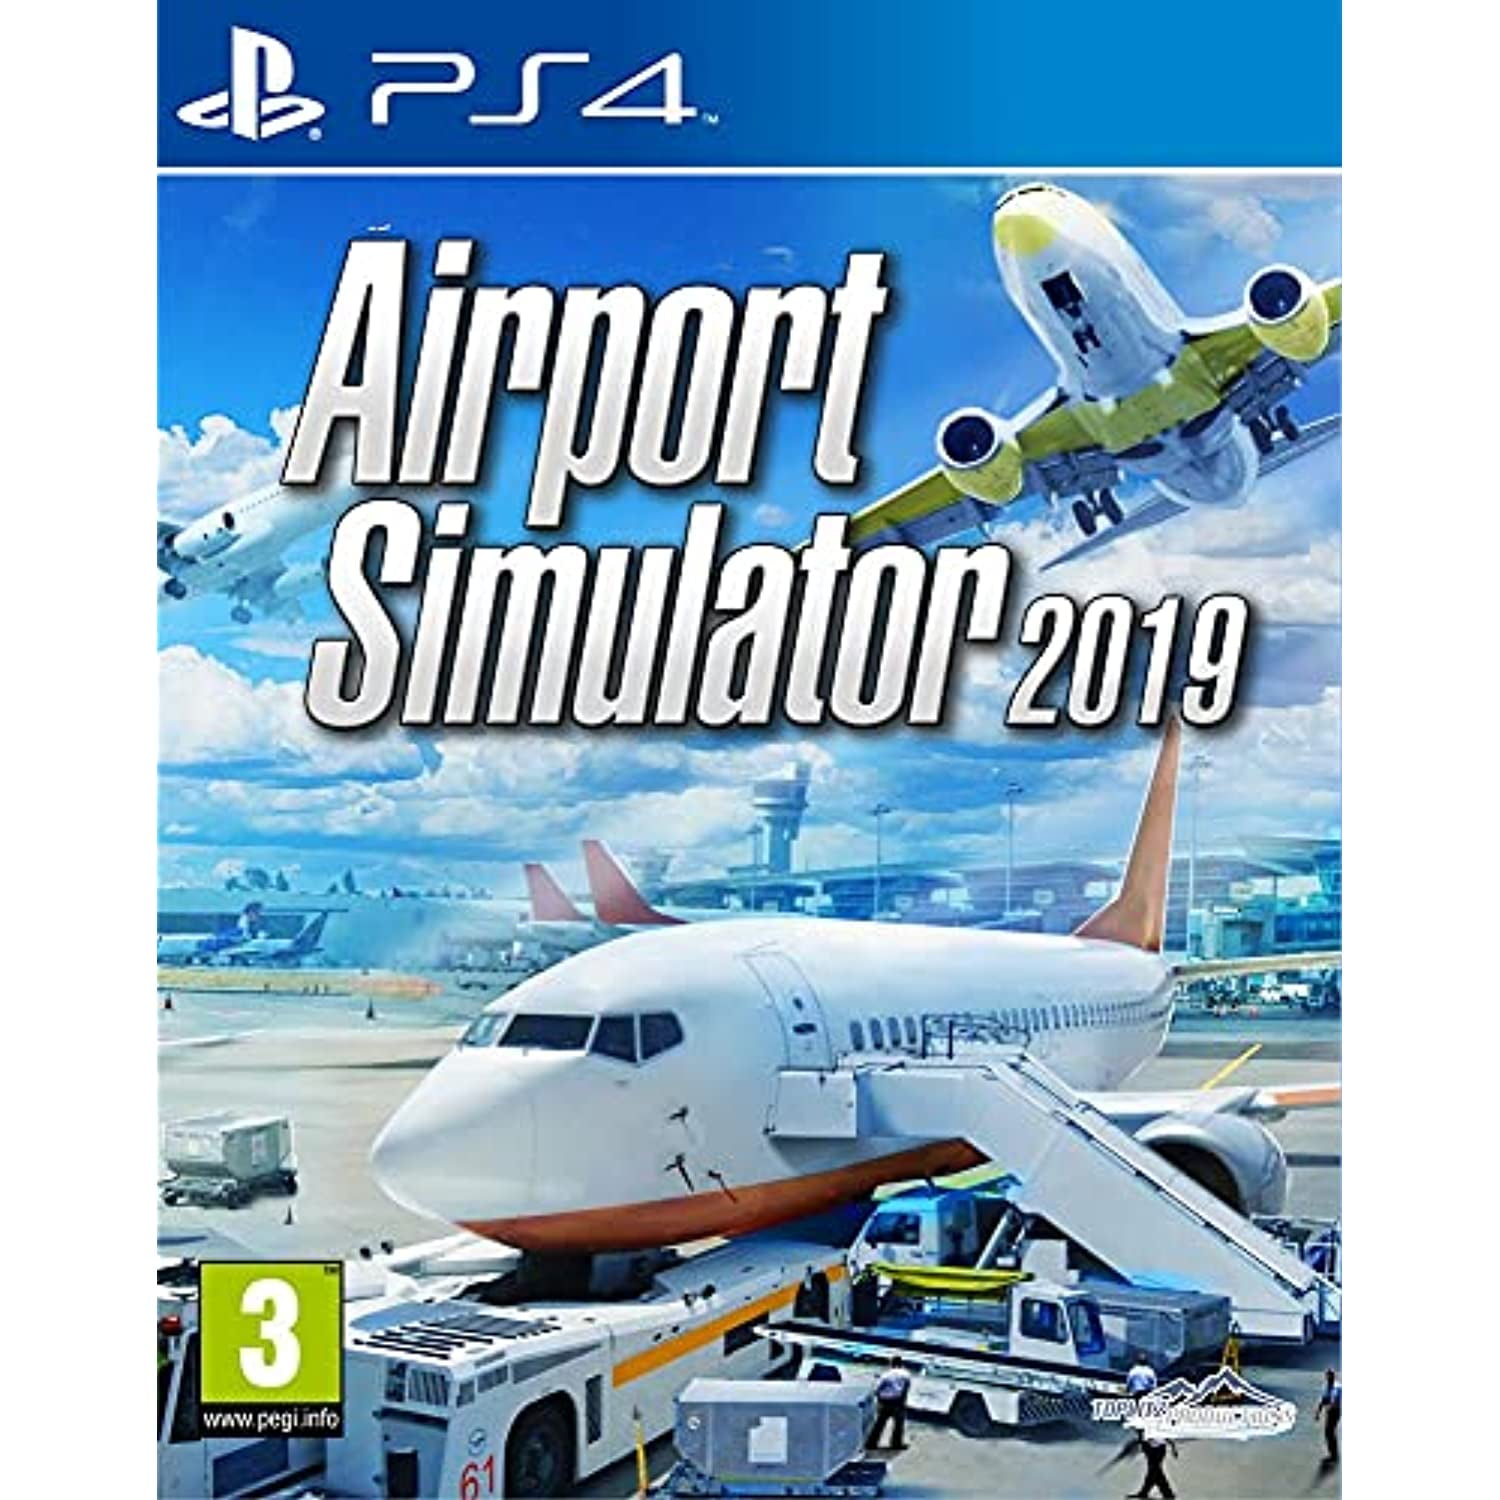 PS4 Island flight simulator Game for Sale in Peoria, AZ - OfferUp